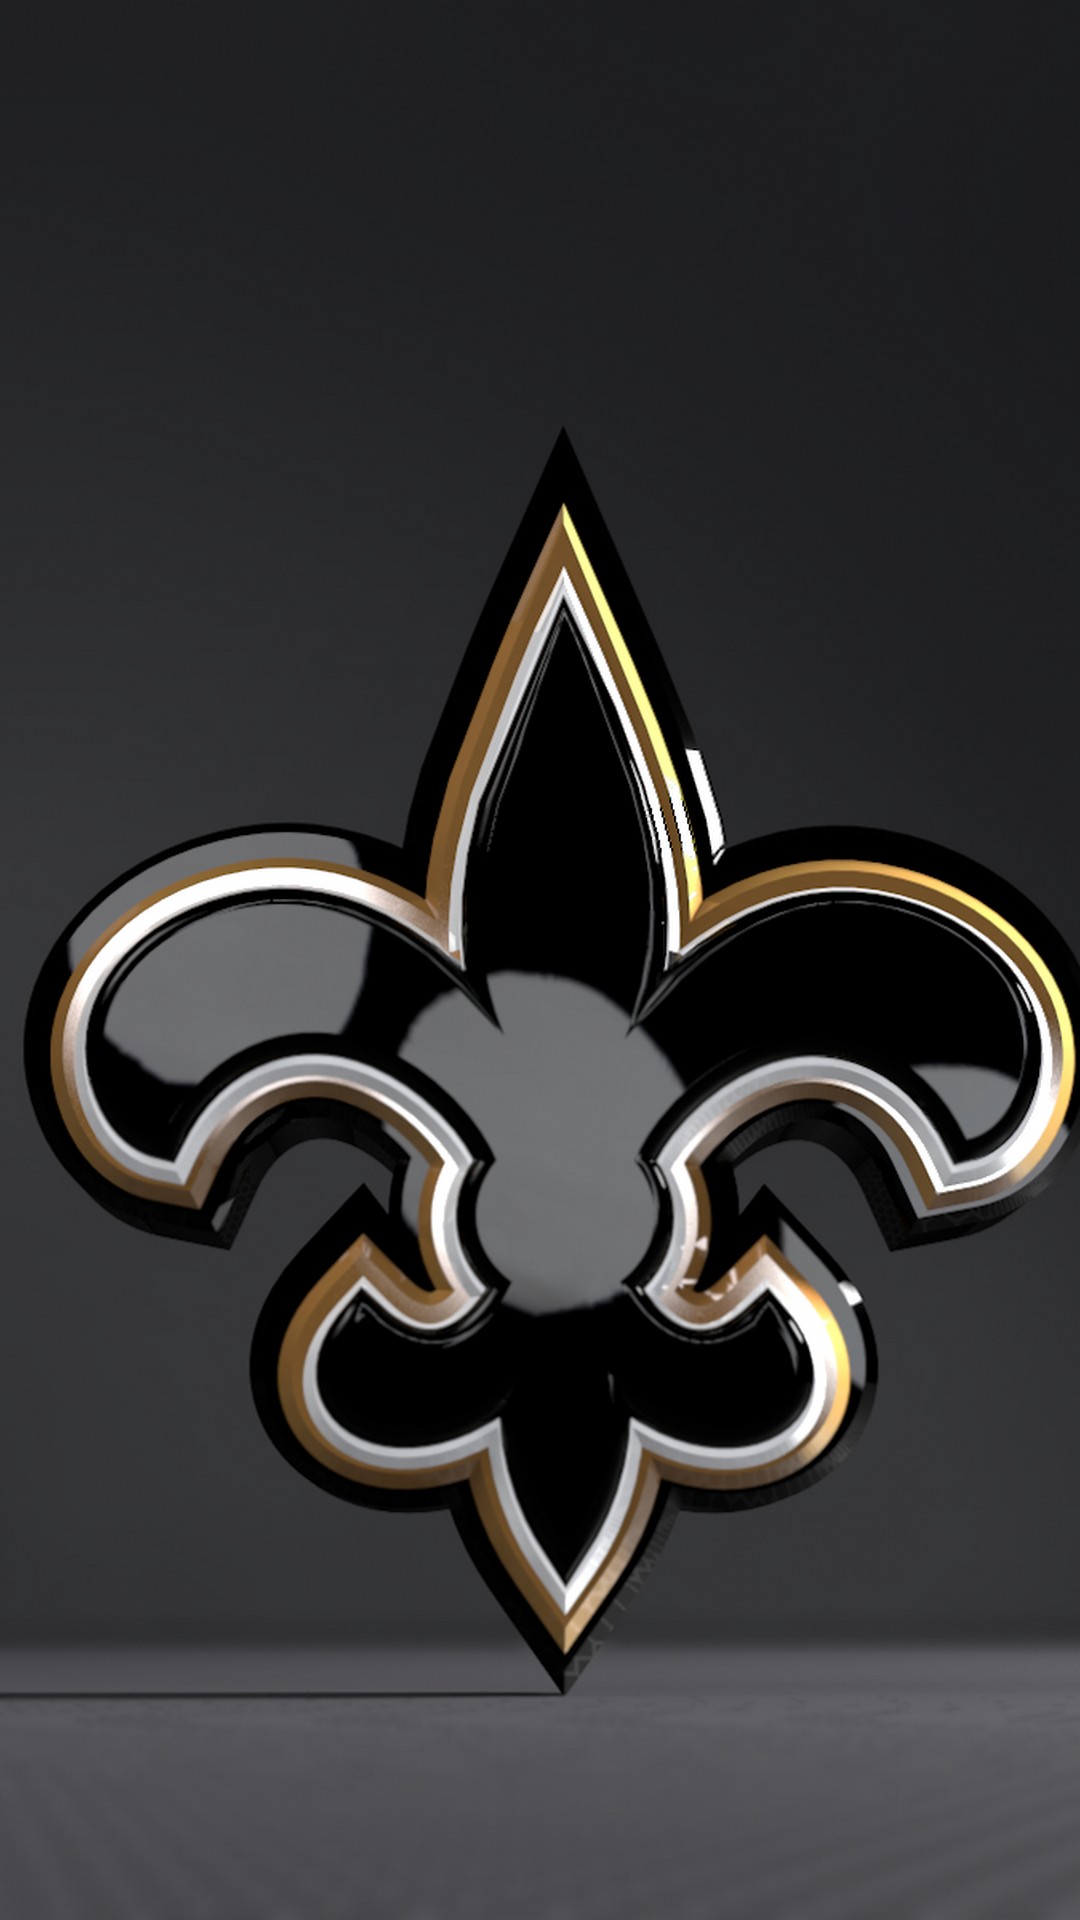 New Orleans Saints iPhone Wallpaper High Quality with high-resolution 1080x1920 pixel. Donwload and set as wallpaper for your iPhone X, iPhone XS home screen backgrounds, XS Max, XR, iPhone8 lock screen wallpaper, iPhone 7, 6, SE and other mobile devices